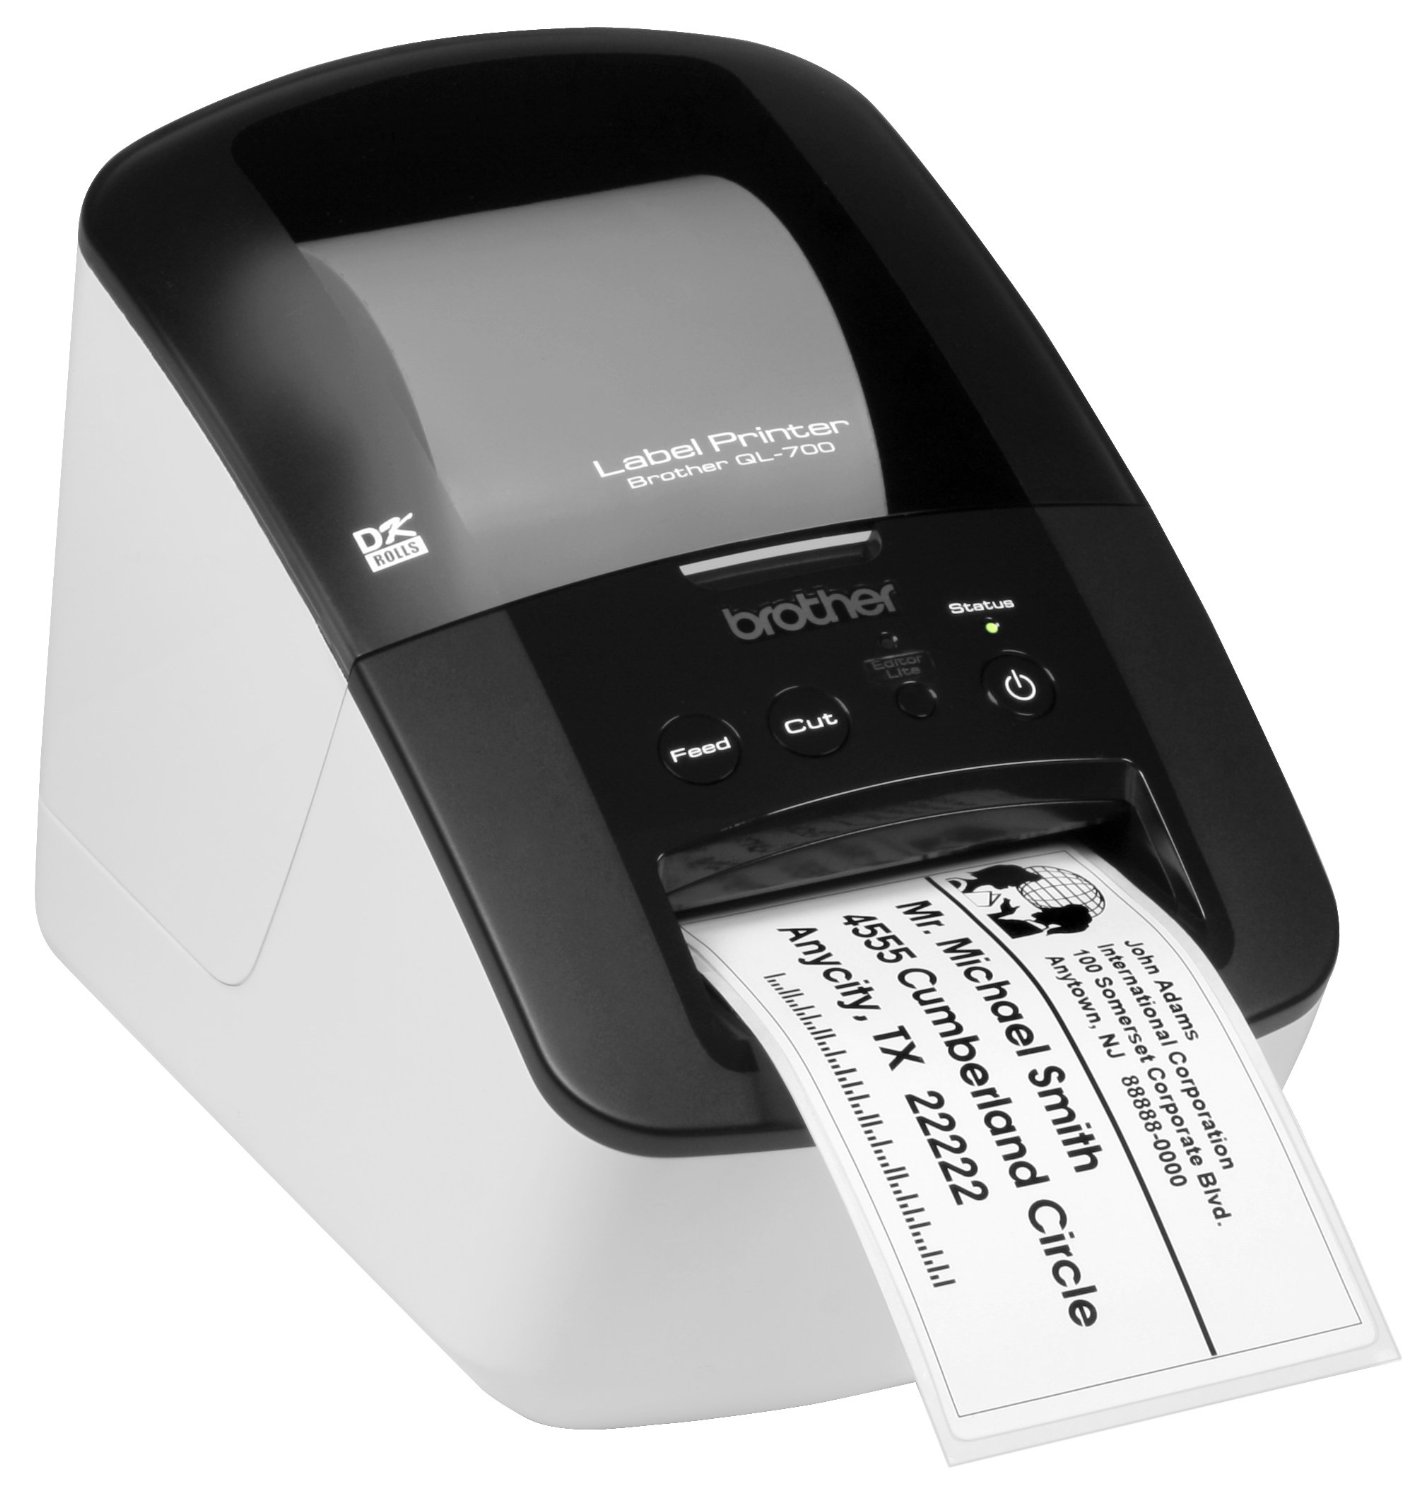 best-product-label-printer-for-small-business nextbestone.com